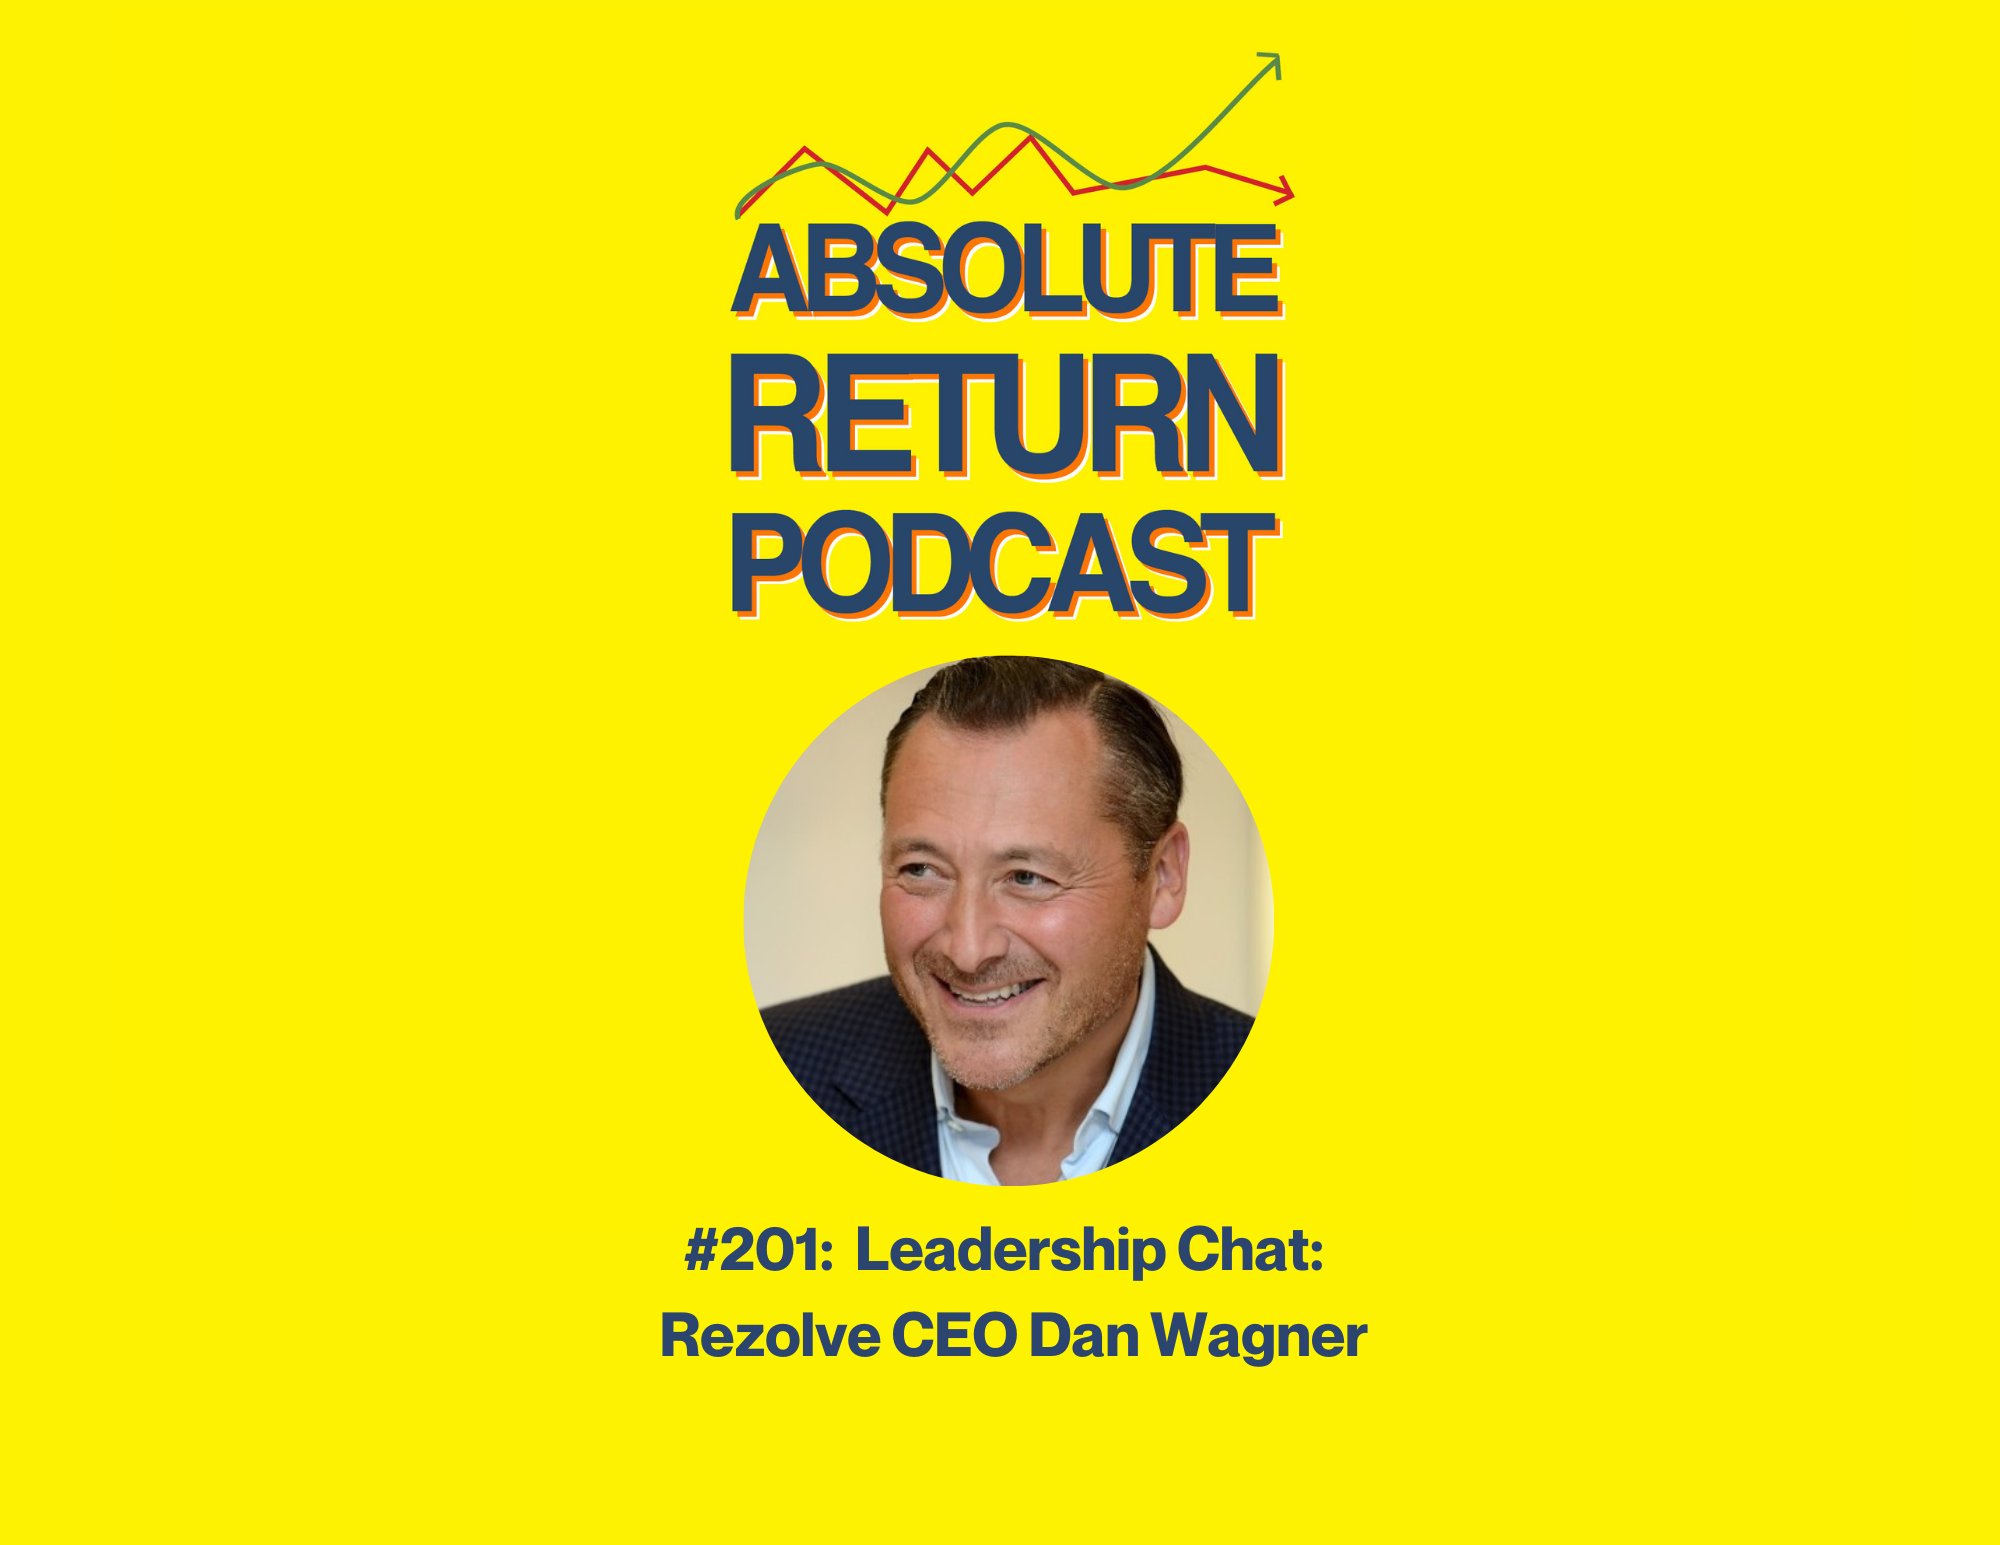 Absolute Return Podcast #201: Leadership Chat: Rezolve CEO Dan Wagner